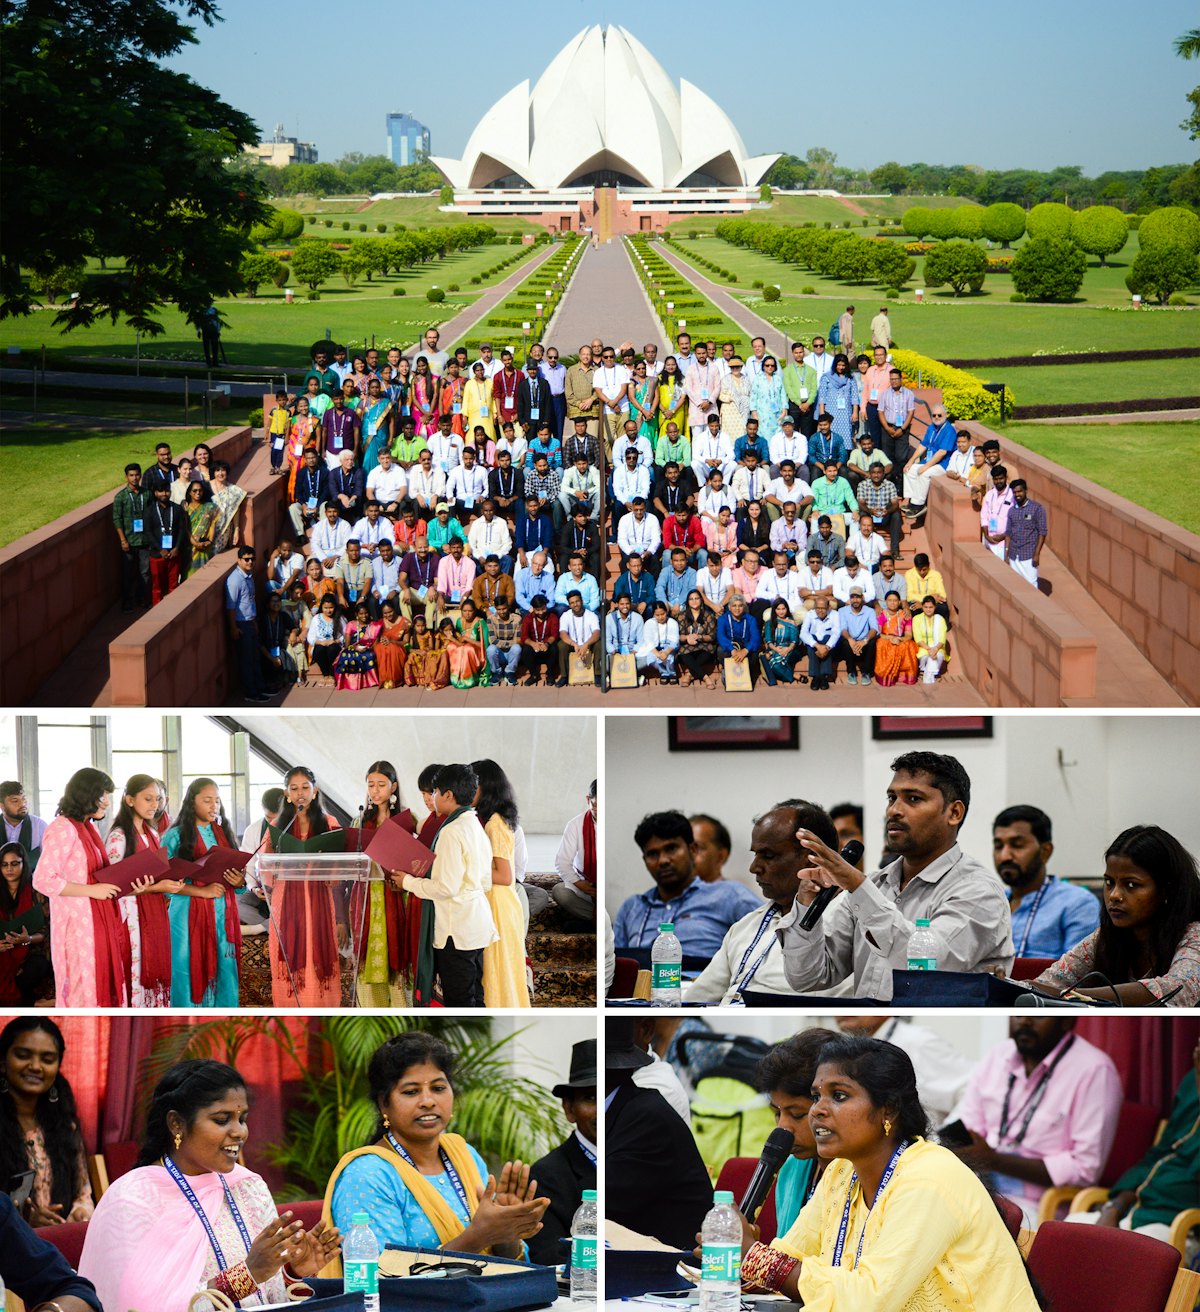 The three-day national convention of the Bahá’ís of India was held at the site of the Bahá'í House of Worship in New Delhi.